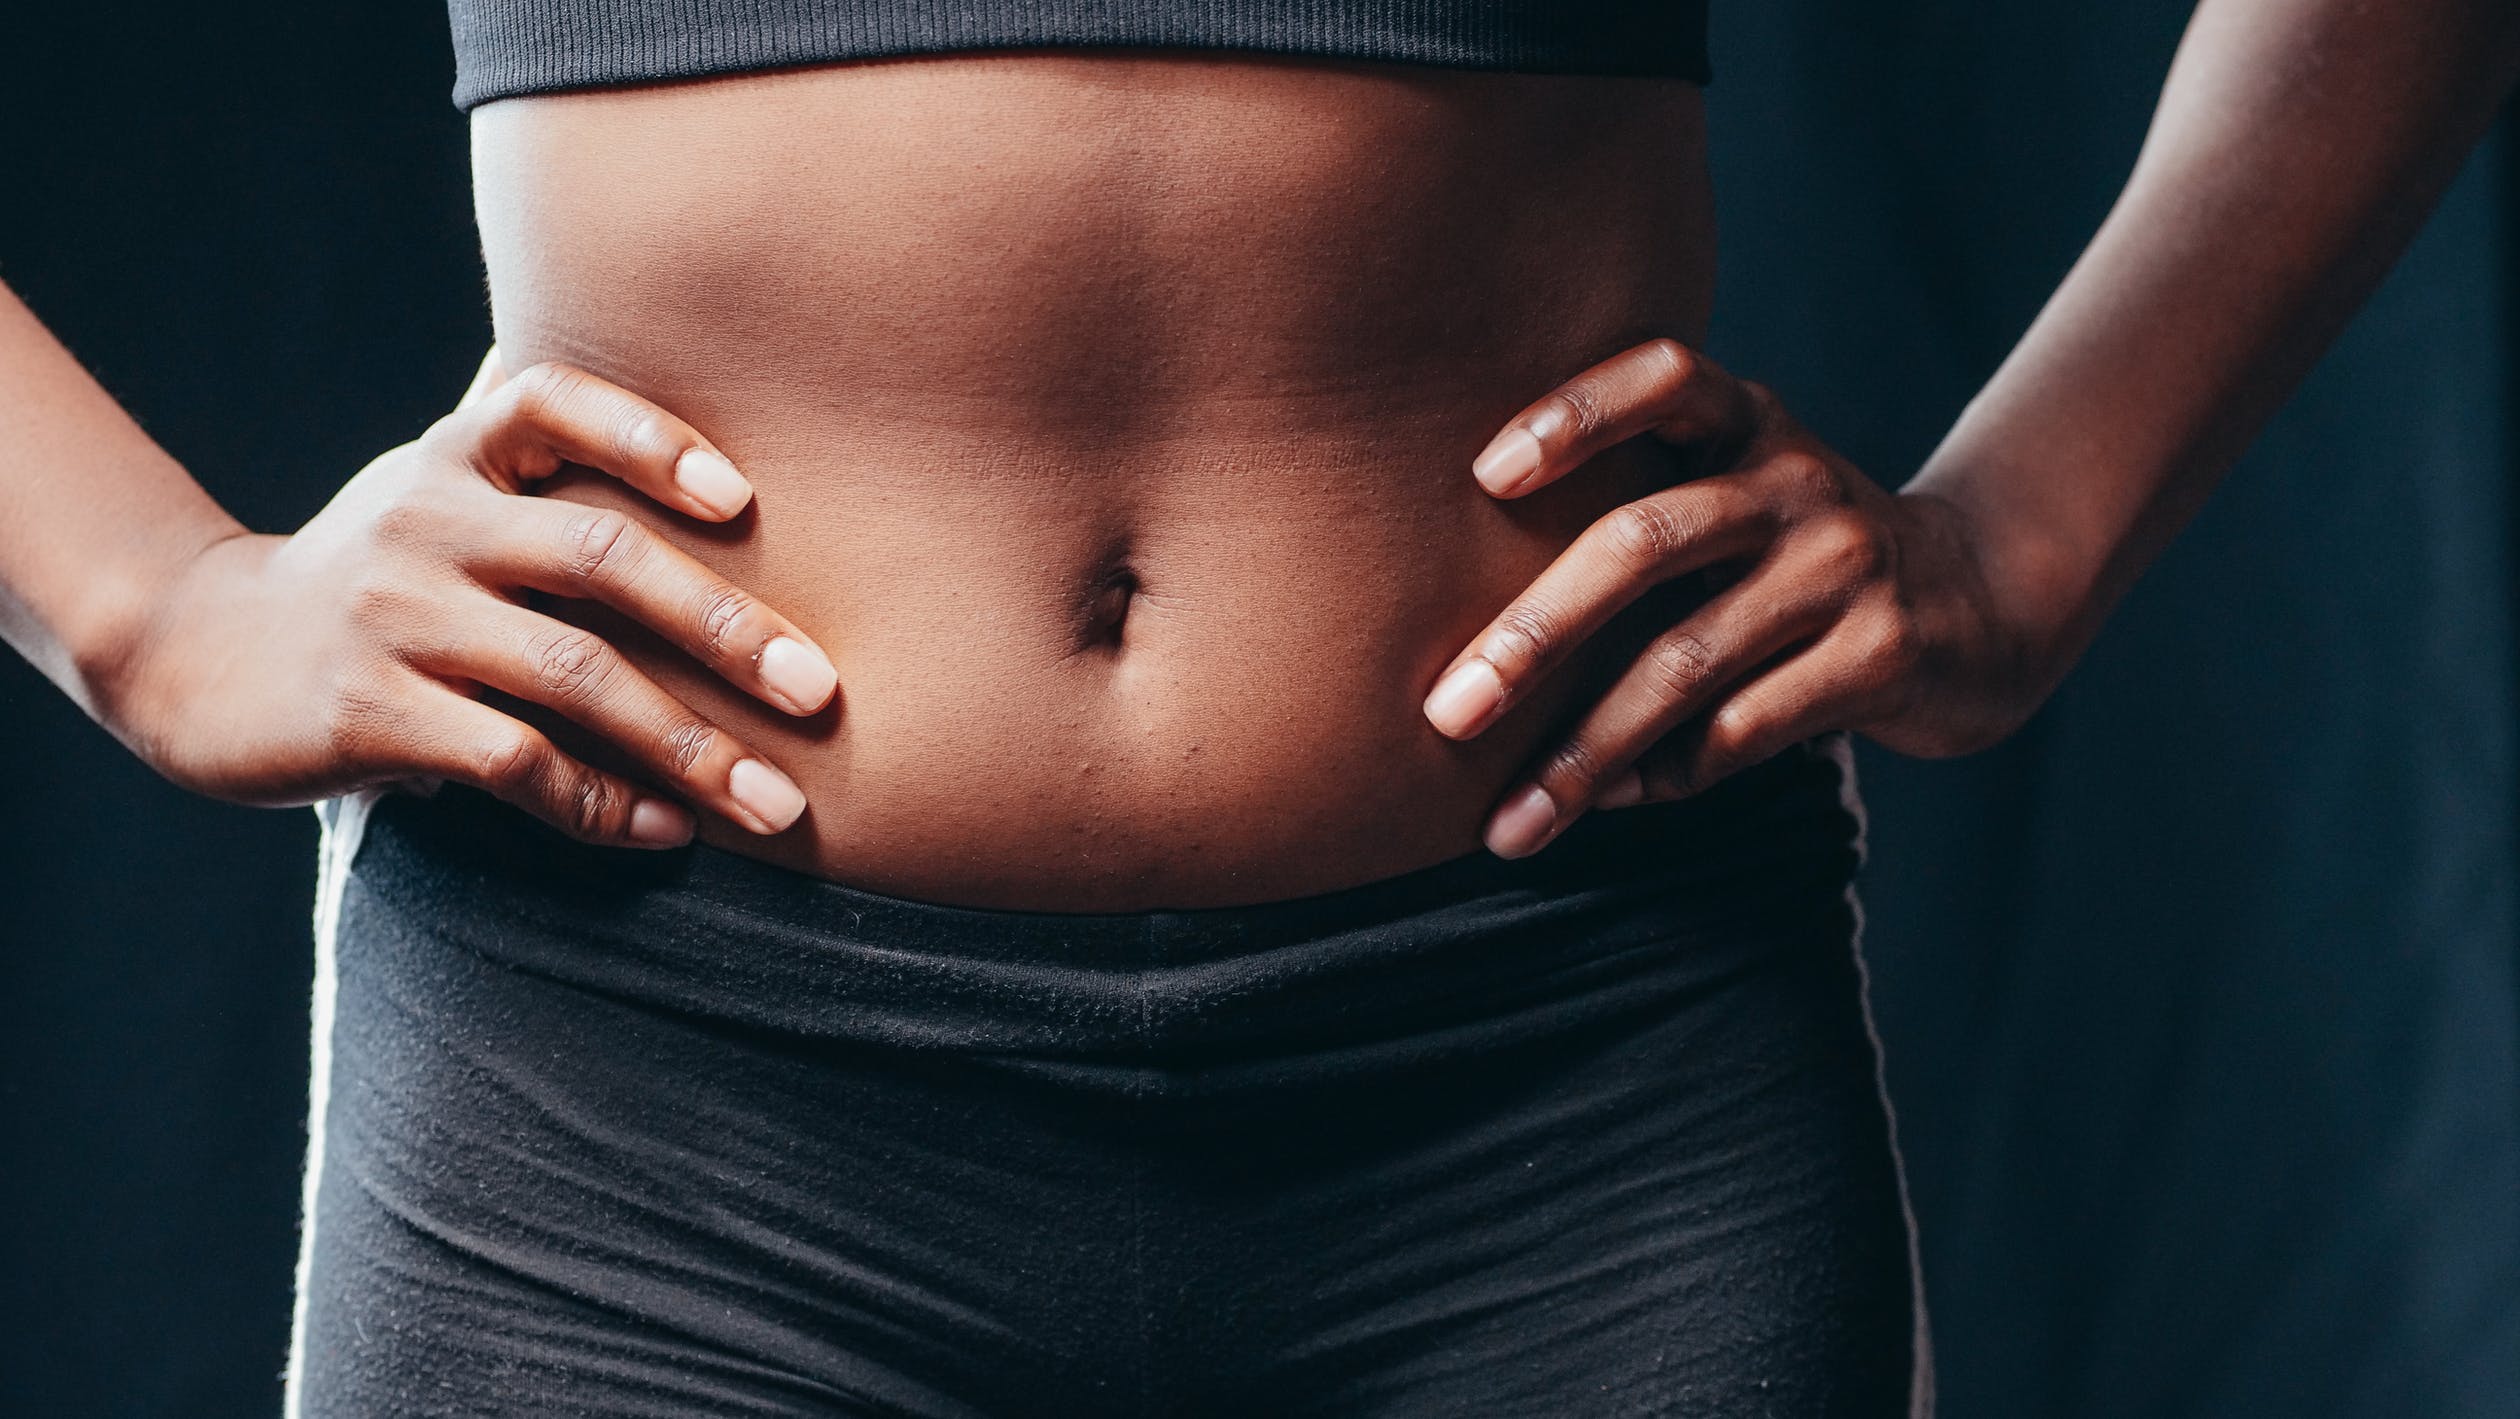 Why Do We Have a Belly Button?